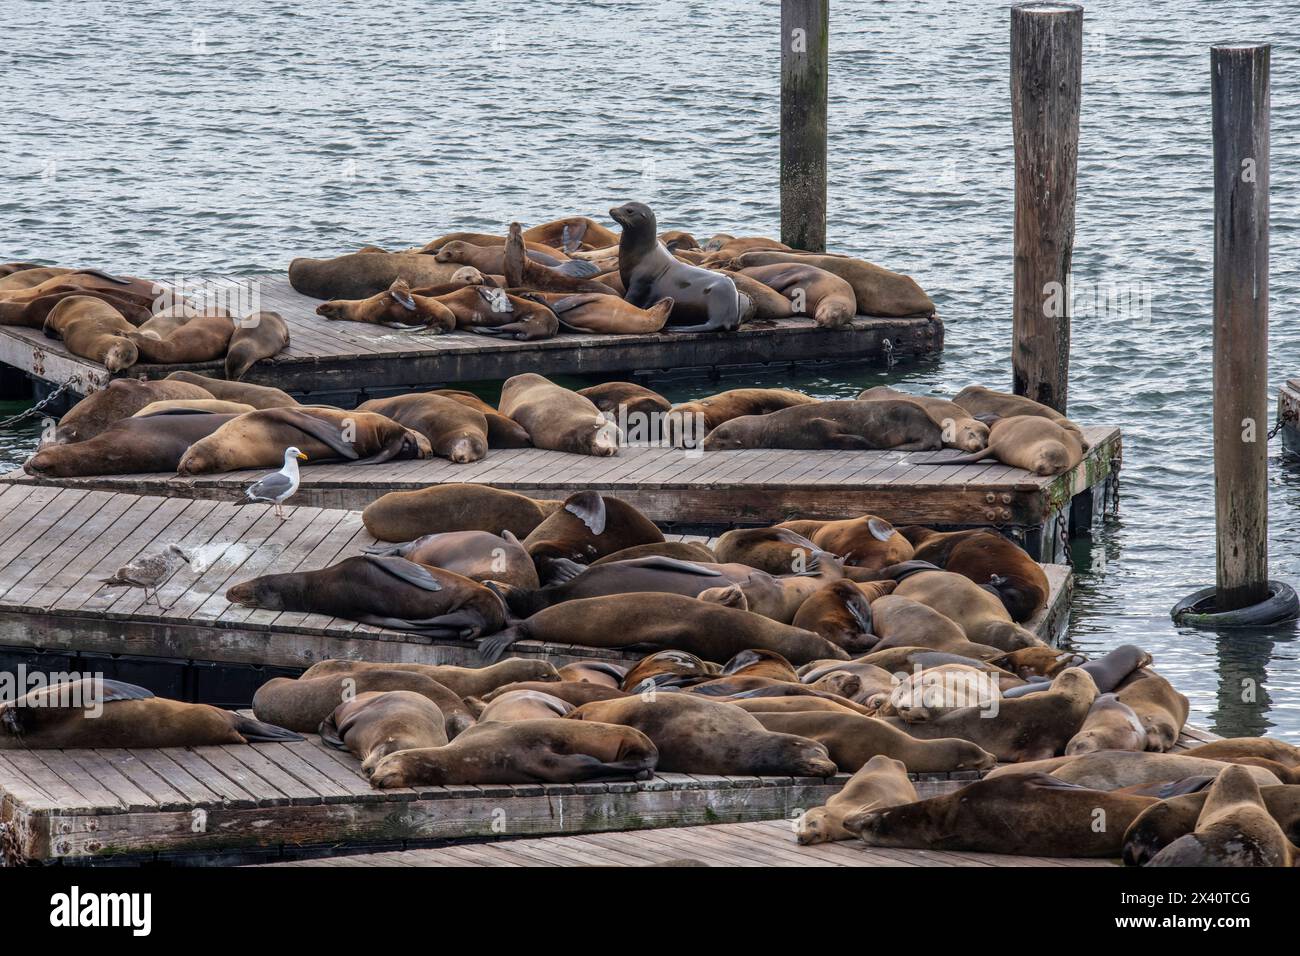 California Sea Lions (Zalophus californianus) napping on the haulout docks at the Sea Lion Viewing Area at Fisherman's Wharf in San Fransisco, Cali... Stock Photo